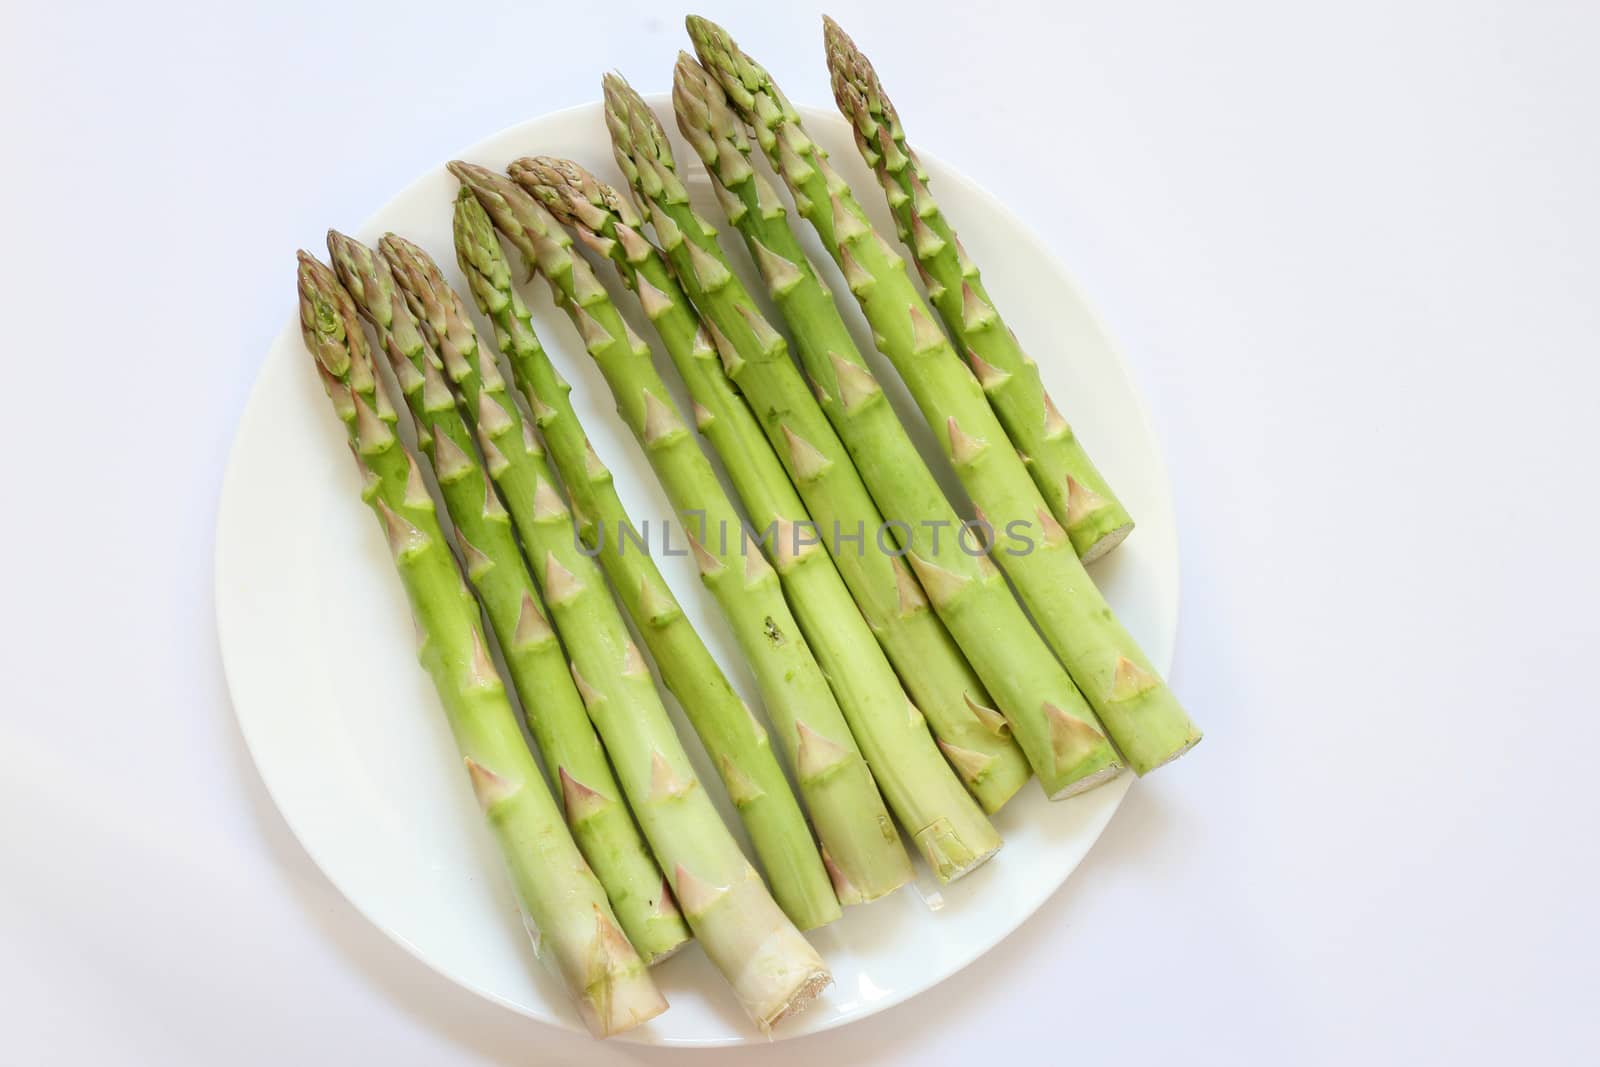 Green vegetable Asparagus bundle in a white plate